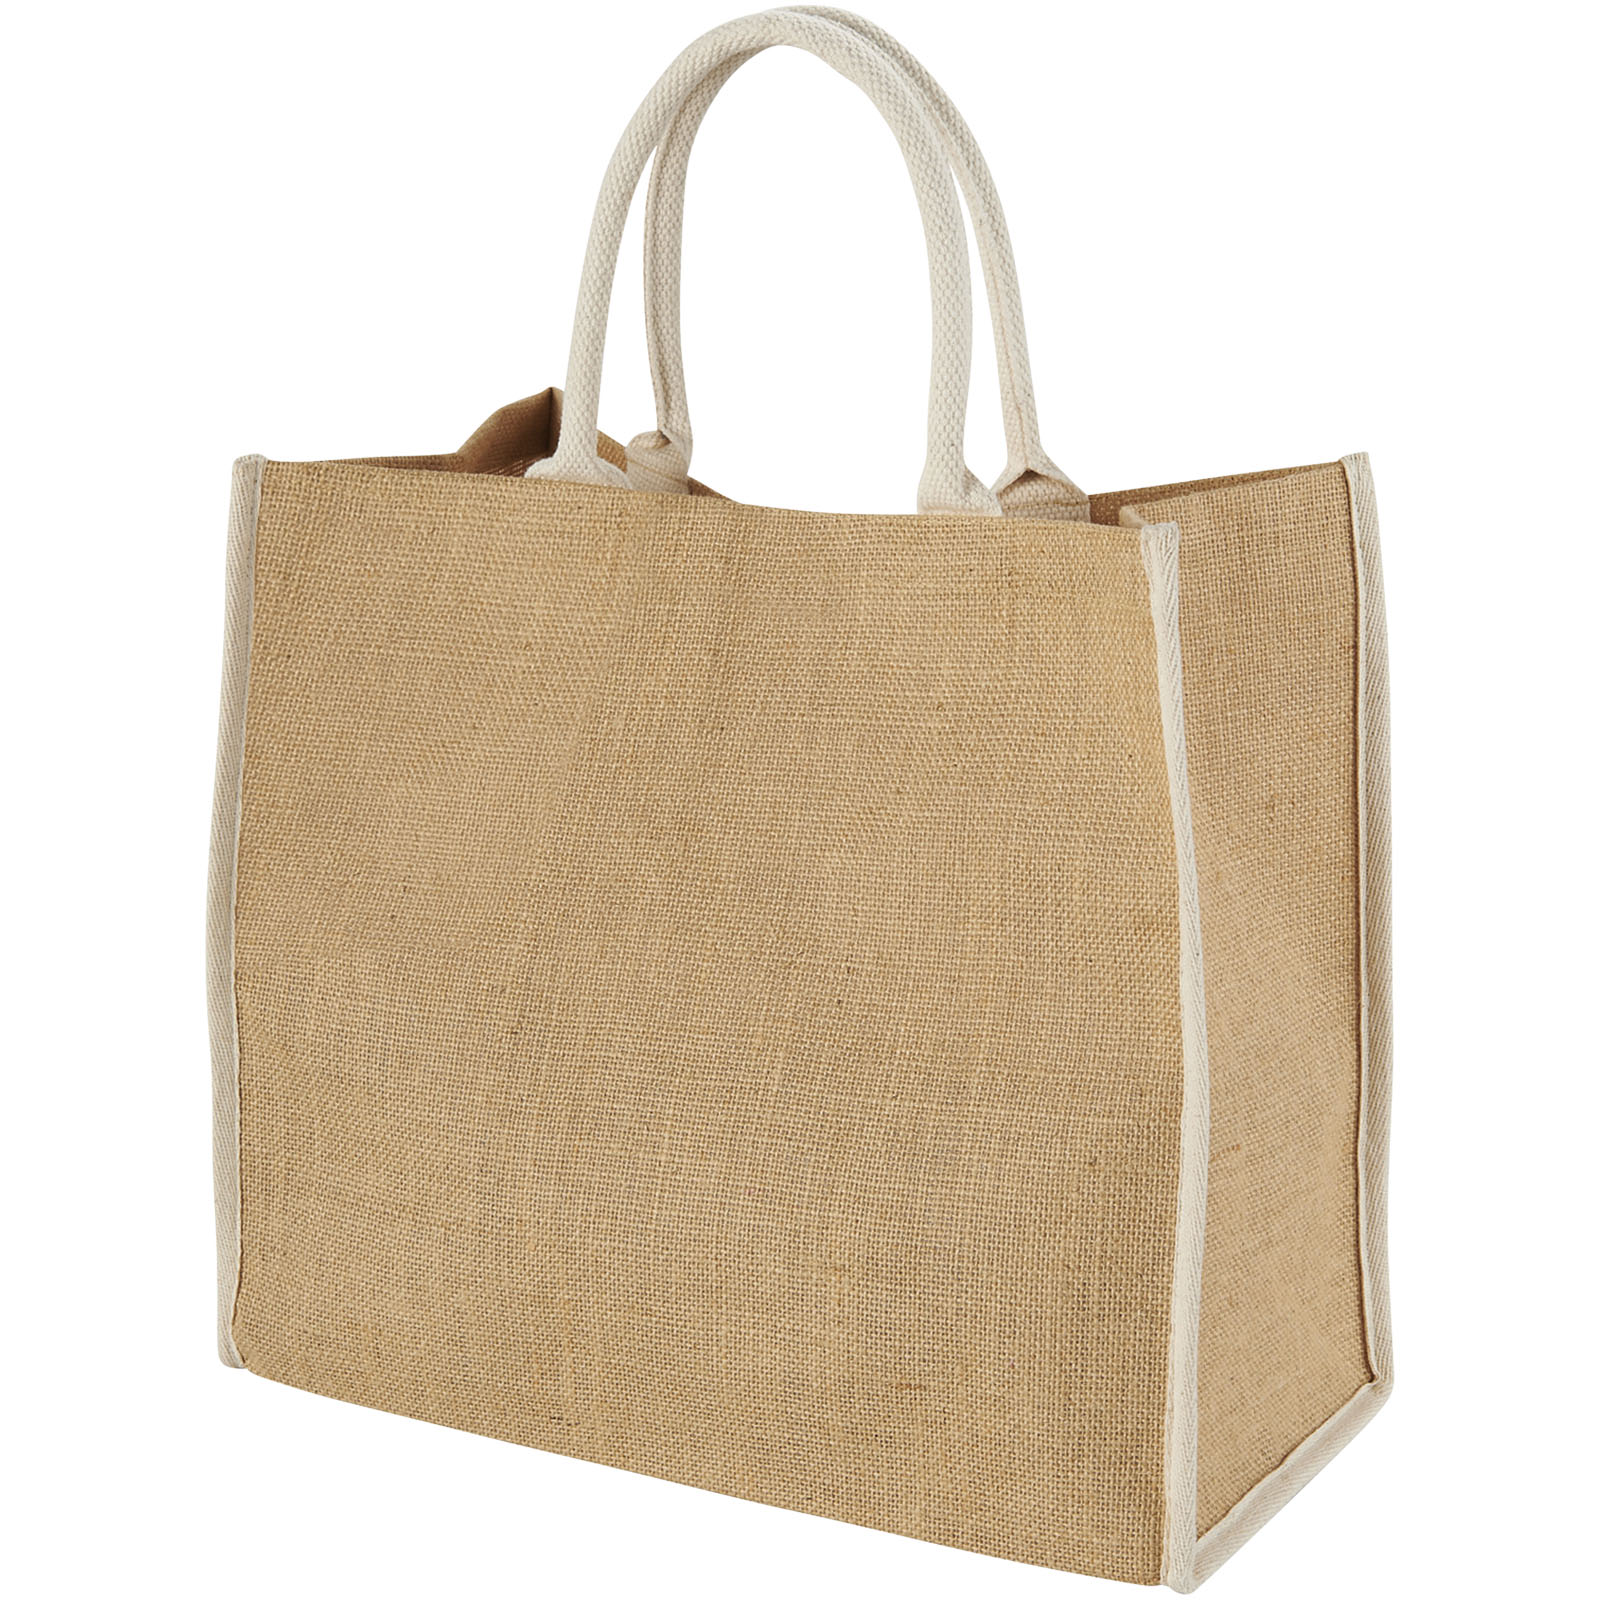 Advertising Shopping & Tote Bags - Harry coloured edge jute tote bag 25L - 0